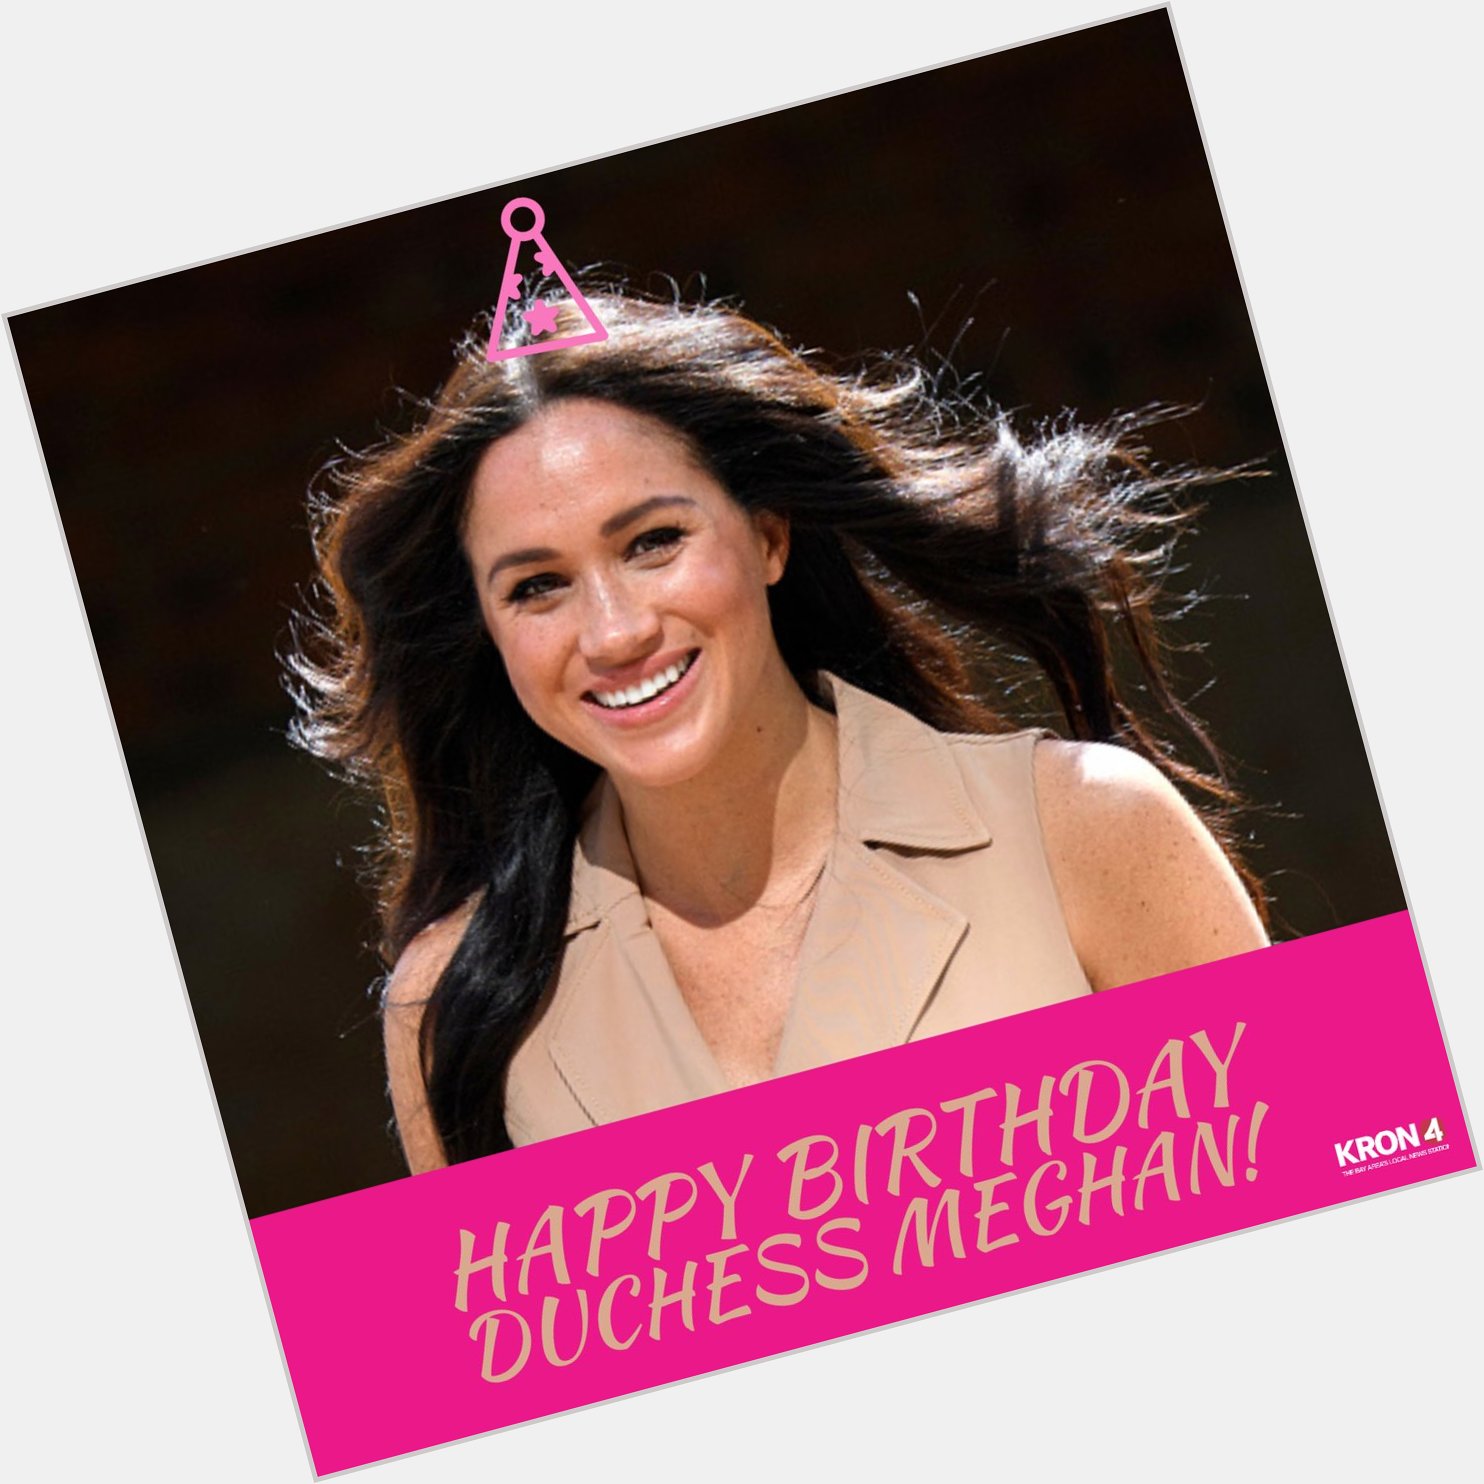 Happy Birthday to the Duchess of Sussex Meghan Markle, who turns 39 today!   